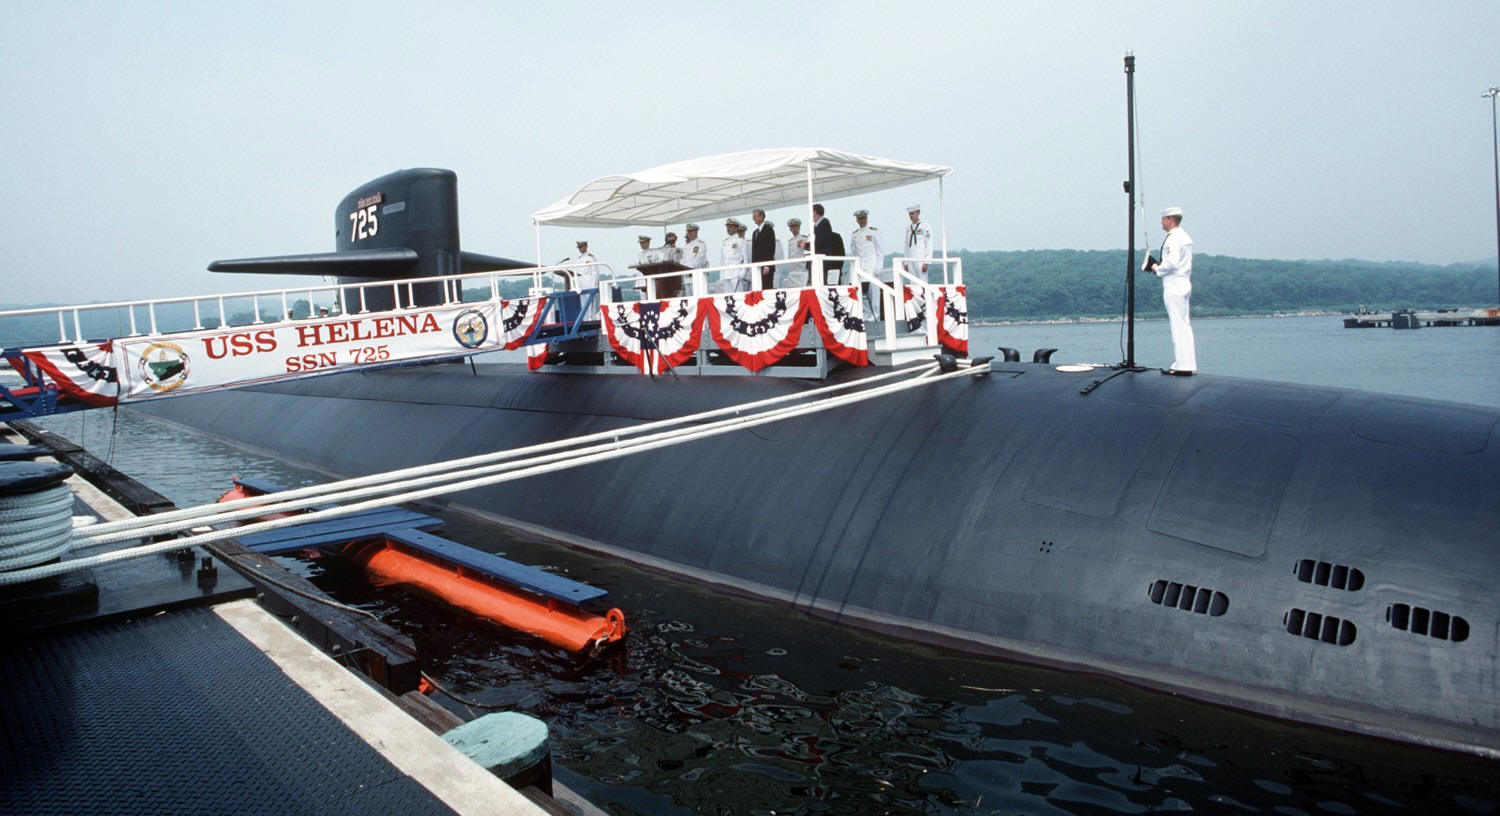 ssn-725 uss helena commissioning ceremony july 1987